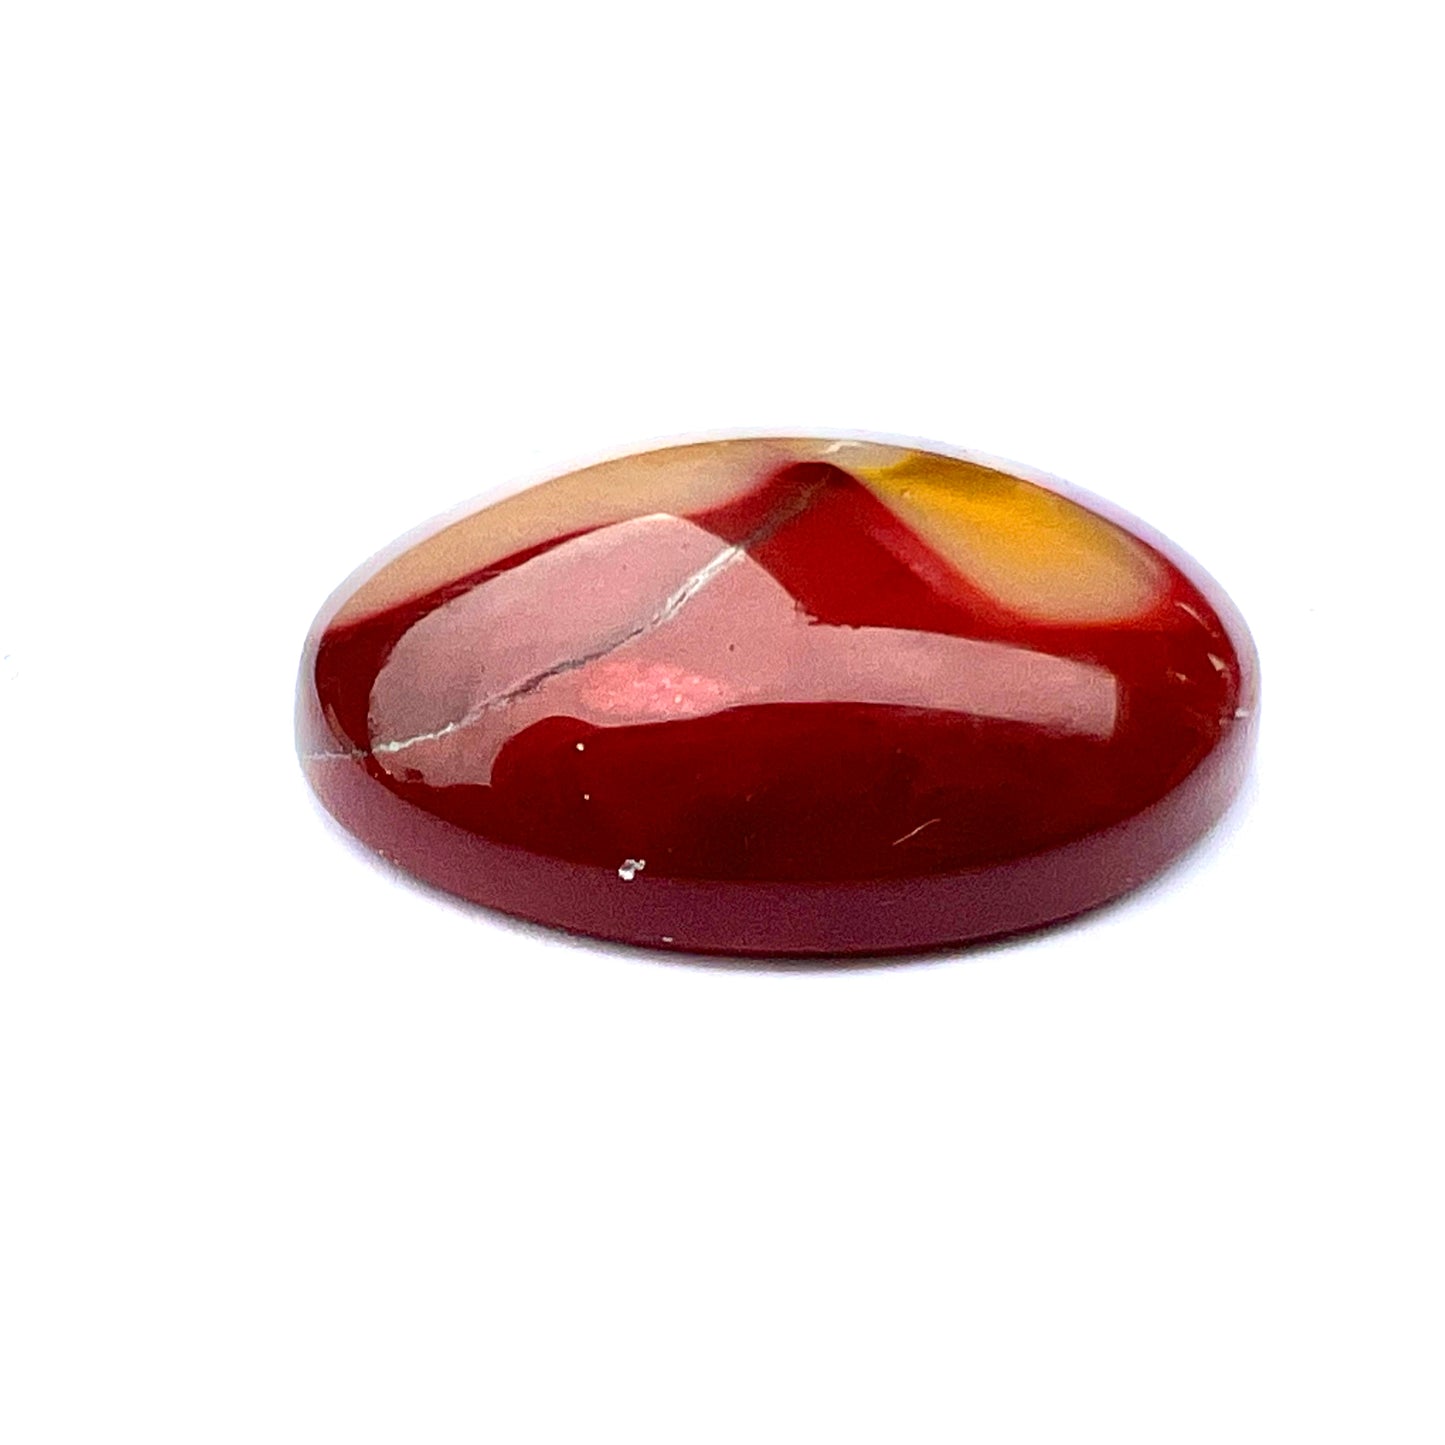 Mookaite Cabochon, 9.55 cts.